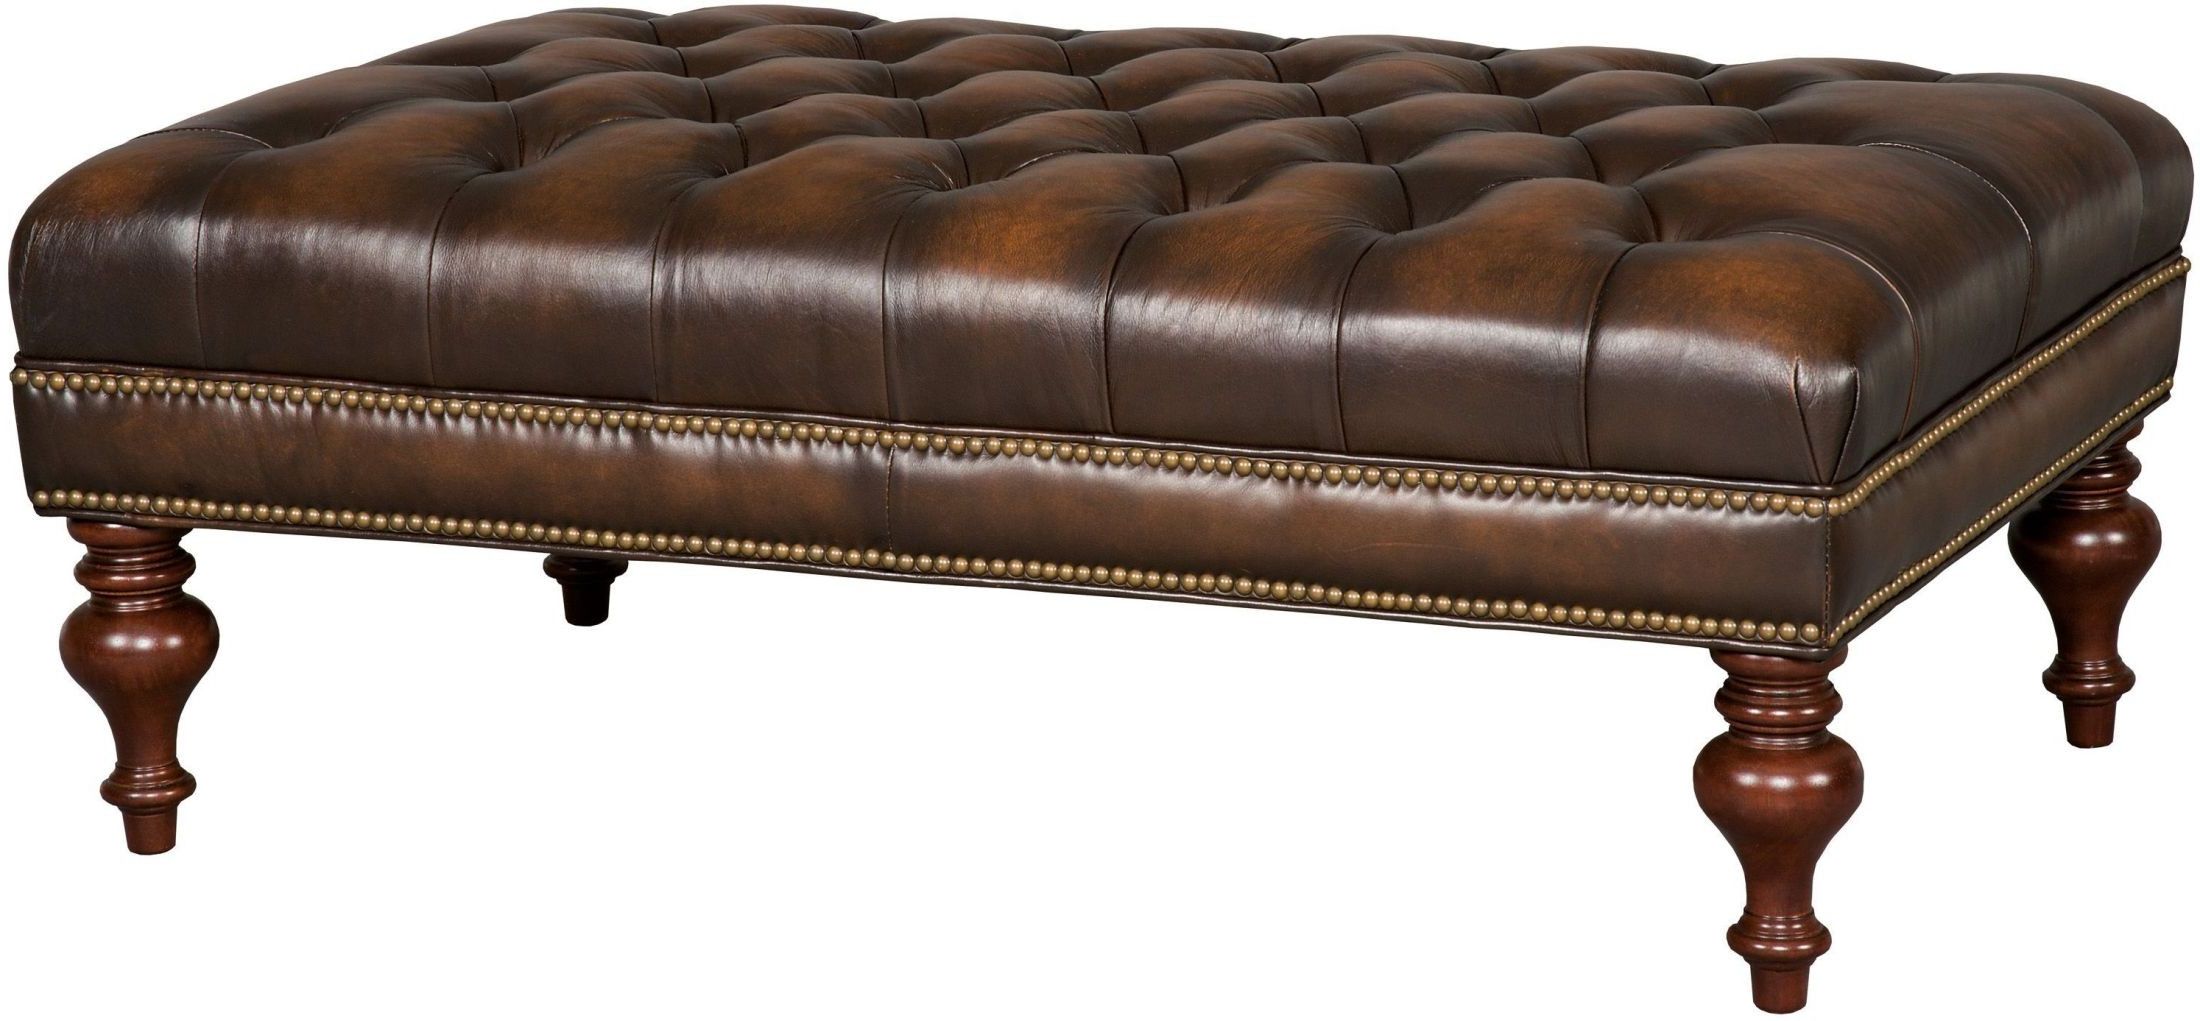 Kingley Brown Tufted Cocktail Leather Ottoman From Hooker Inside Most Up To Date Tufted Ottoman Cocktail Tables (View 18 of 20)